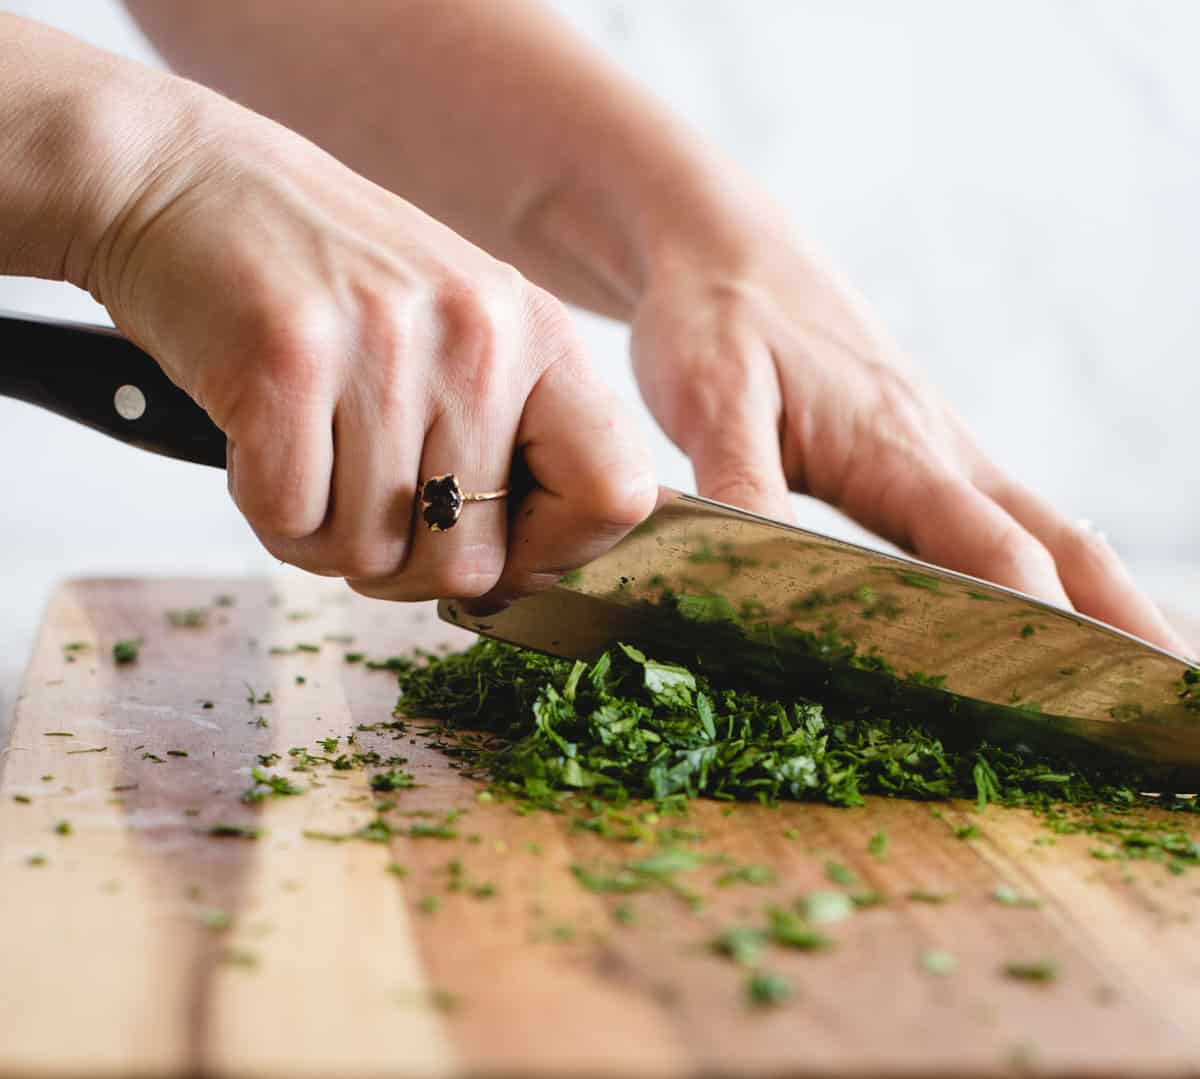 Hands chopping fresh herbs with a knife on a cutting board